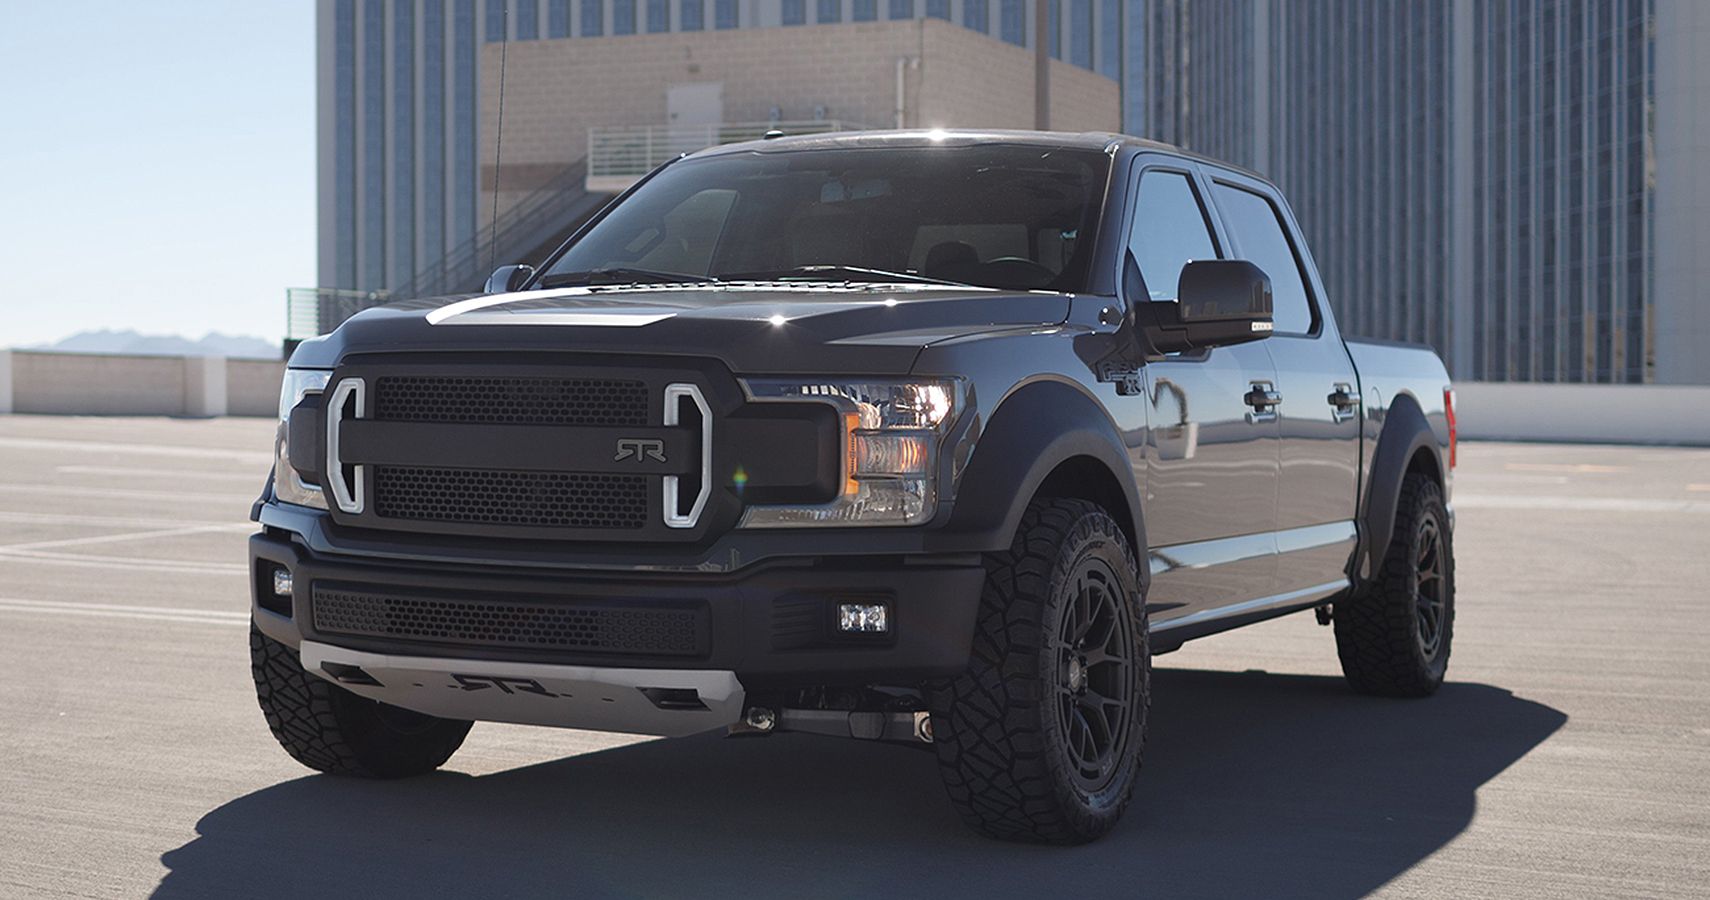 Ford F-150 RTR Performance Truck: From A Champion Drifter